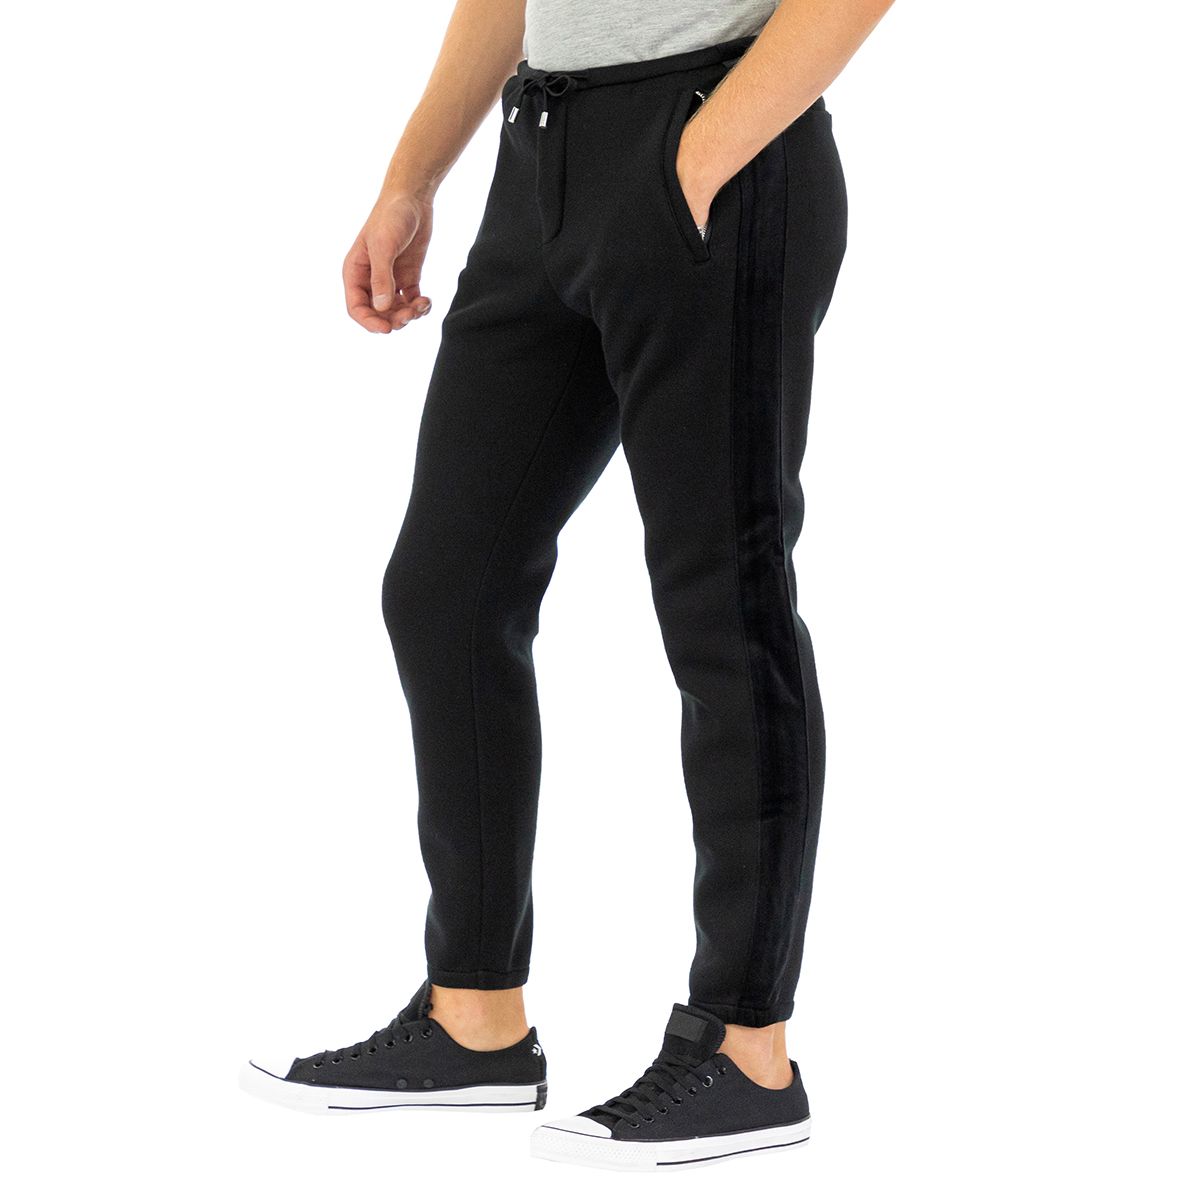 Emporio Armani 6Z1PP51JTTZ-0999-XL Comfortable and trendy, these black pants will complement any casual look.